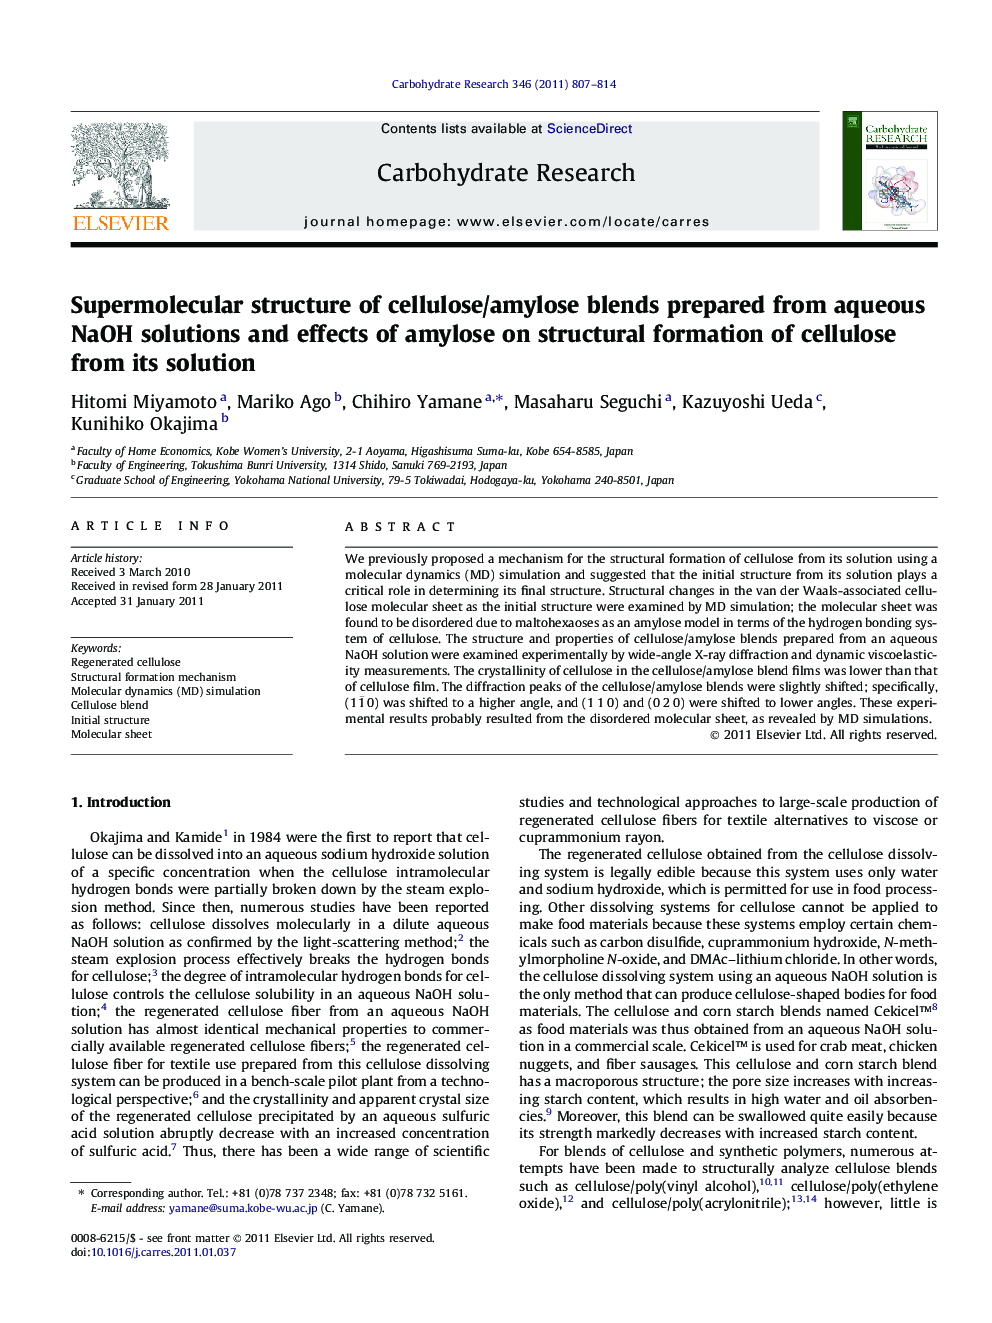 Supermolecular structure of cellulose/amylose blends prepared from aqueous NaOH solutions and effects of amylose on structural formation of cellulose from its solution